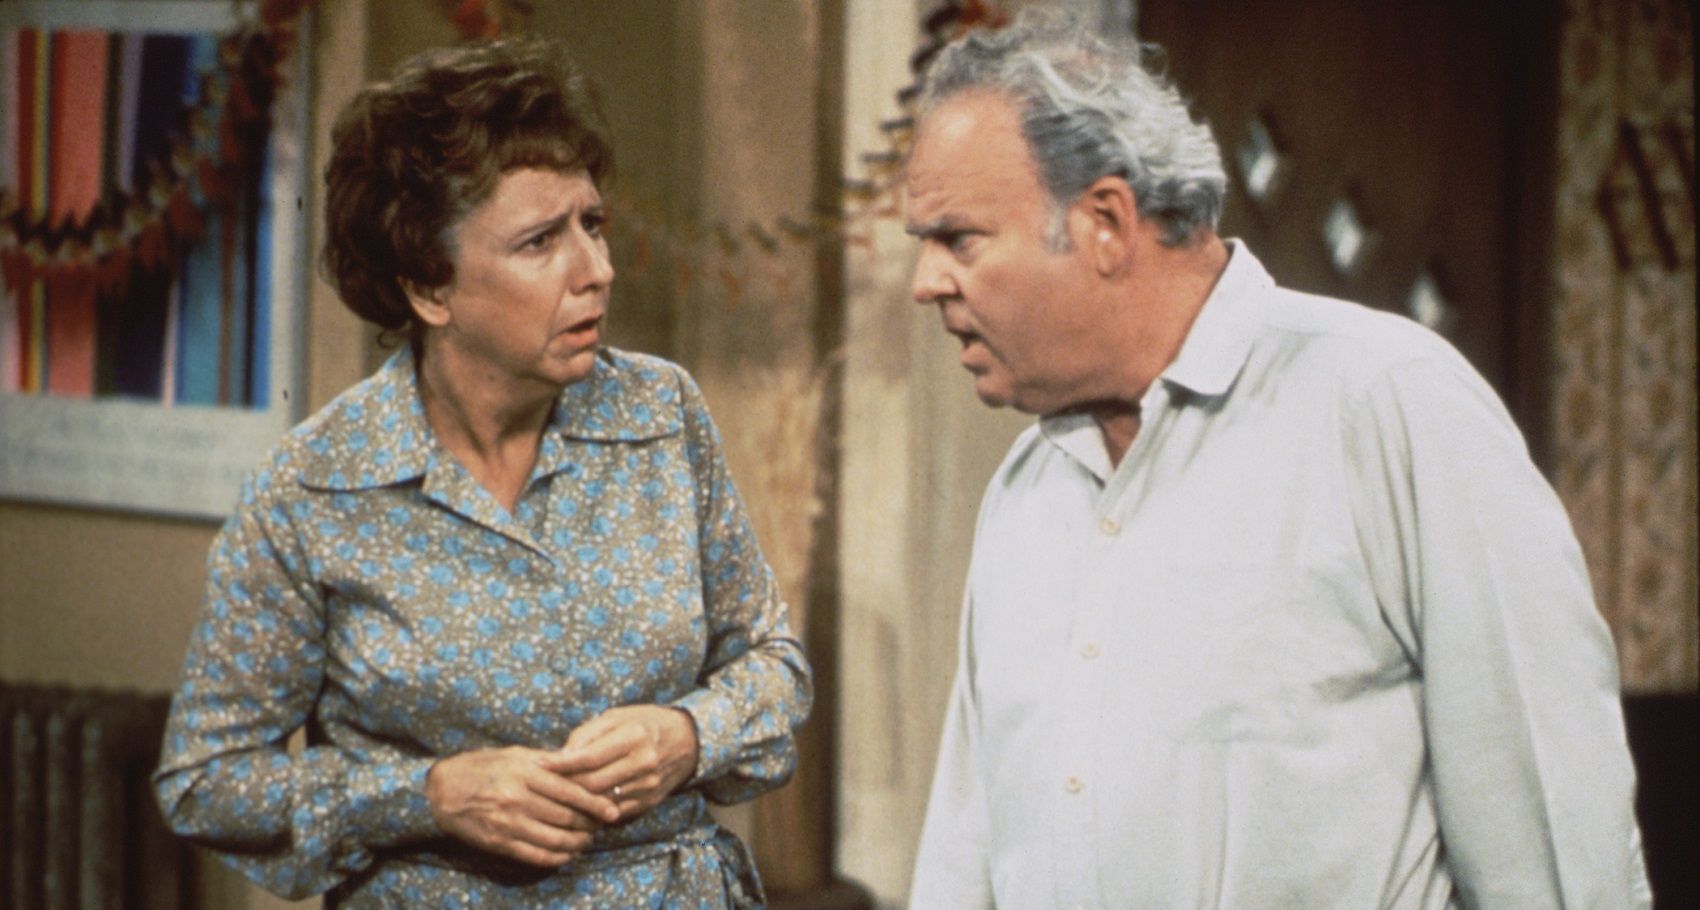 Stapleton And O'Connor In 'All In The Family'